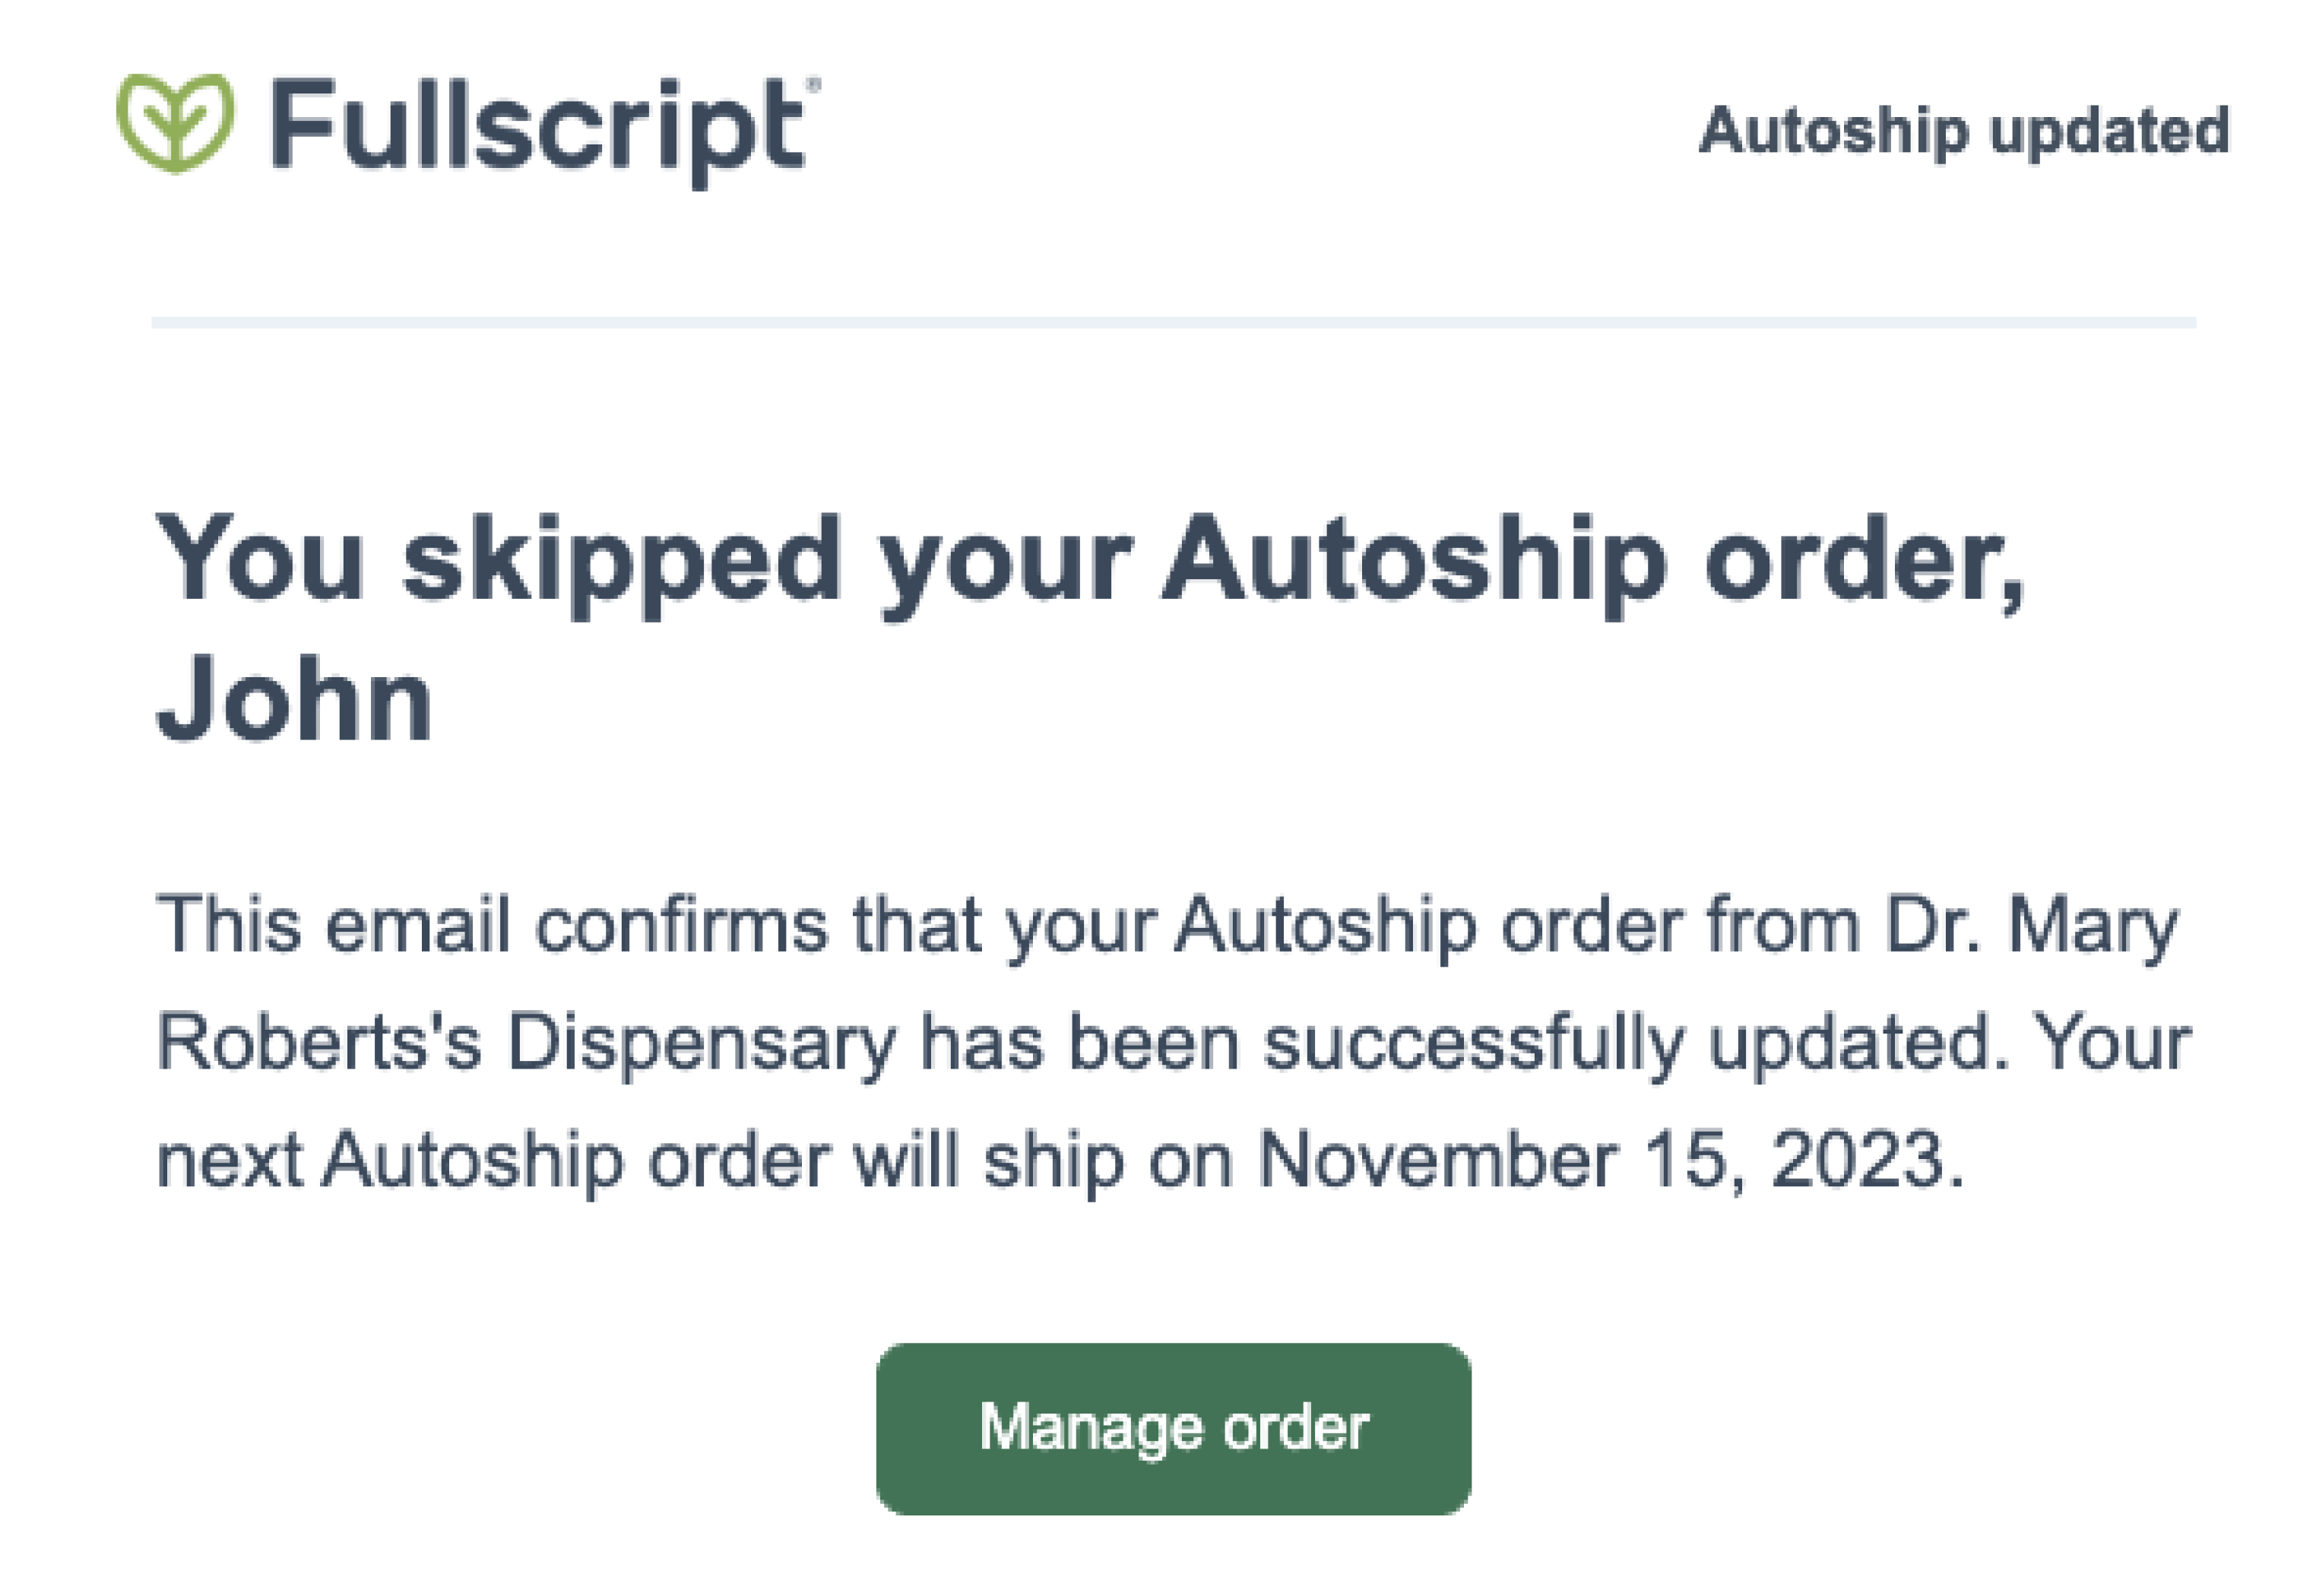 An autoship updated email